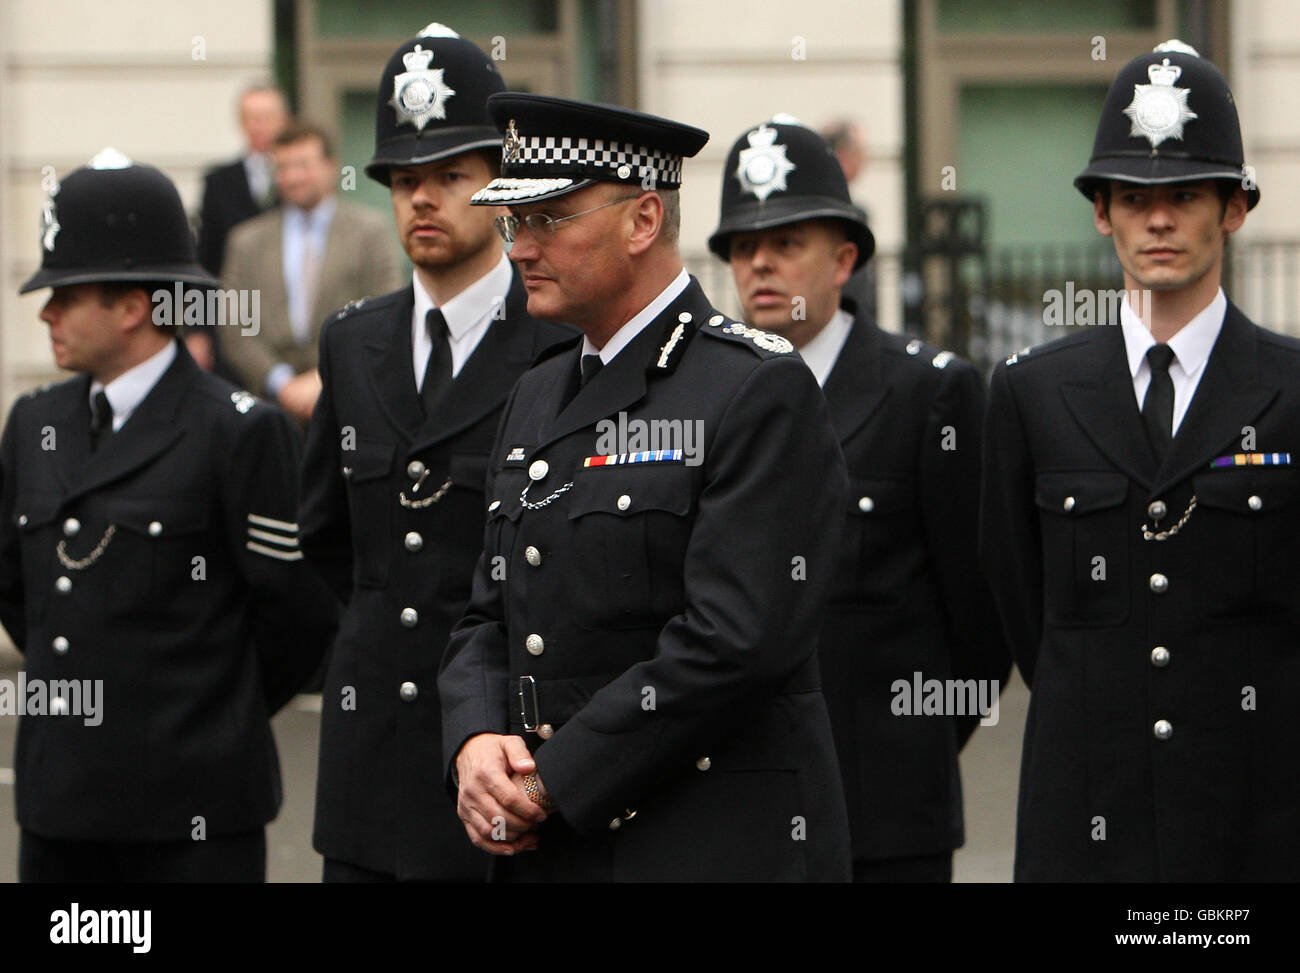 Metropolitan Police Chief Commissioner Sir Paul Stephenson at a memorial service in St James's Square, London, to mark the 25th anniversary of the murder of PC Yvonne Fletcher. PRESS ASSOCIATION photo. Picture Date: Friday April 17th, 2009. Photo credit should read: Dominic Lipinski/PA Wire Stock Photo